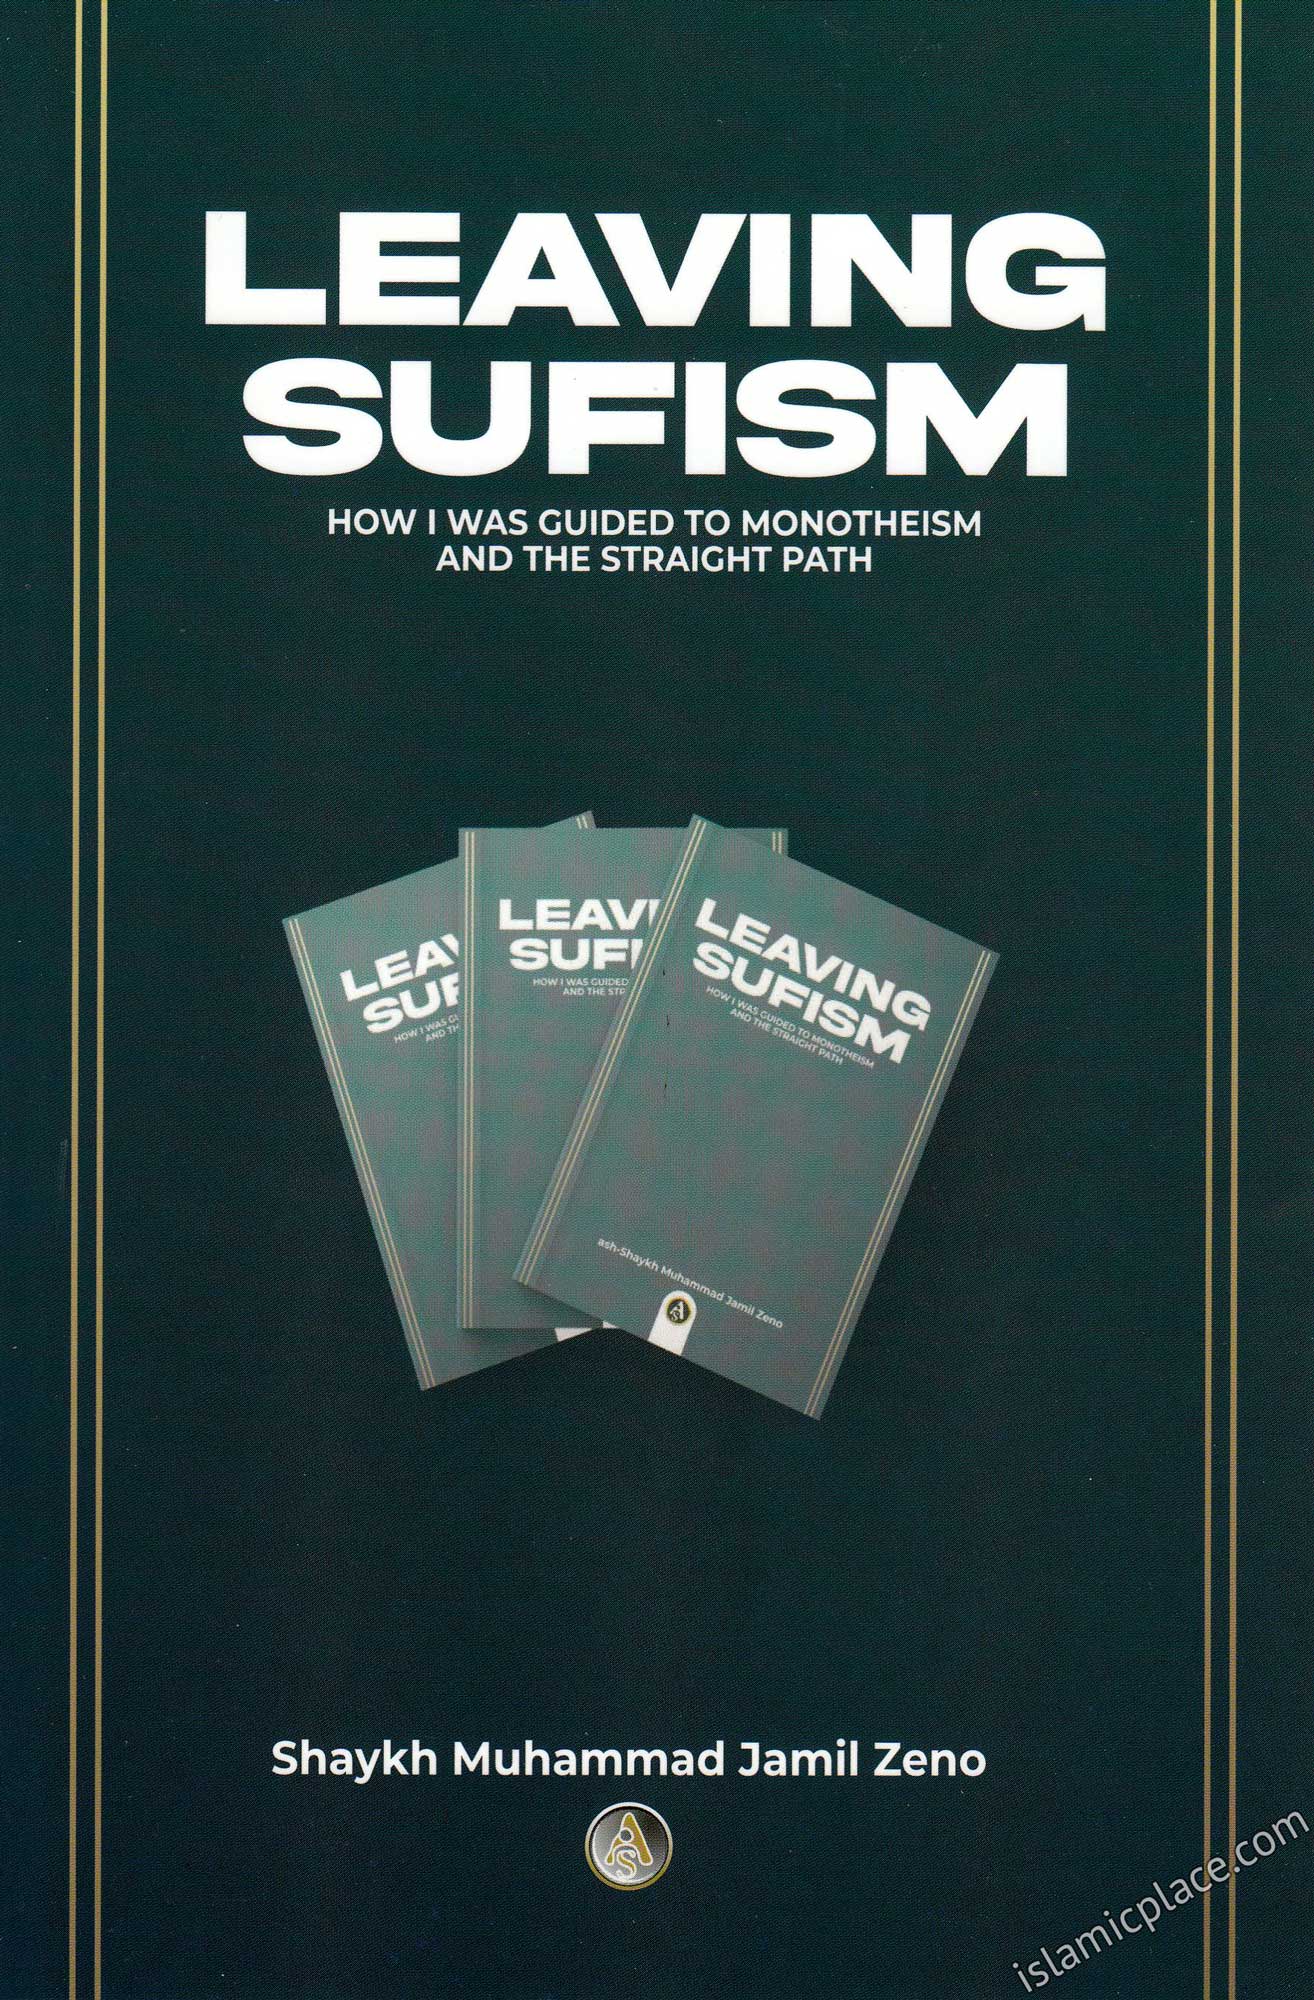 Leaving Sufism - How I was guided to monotheism and the straight path